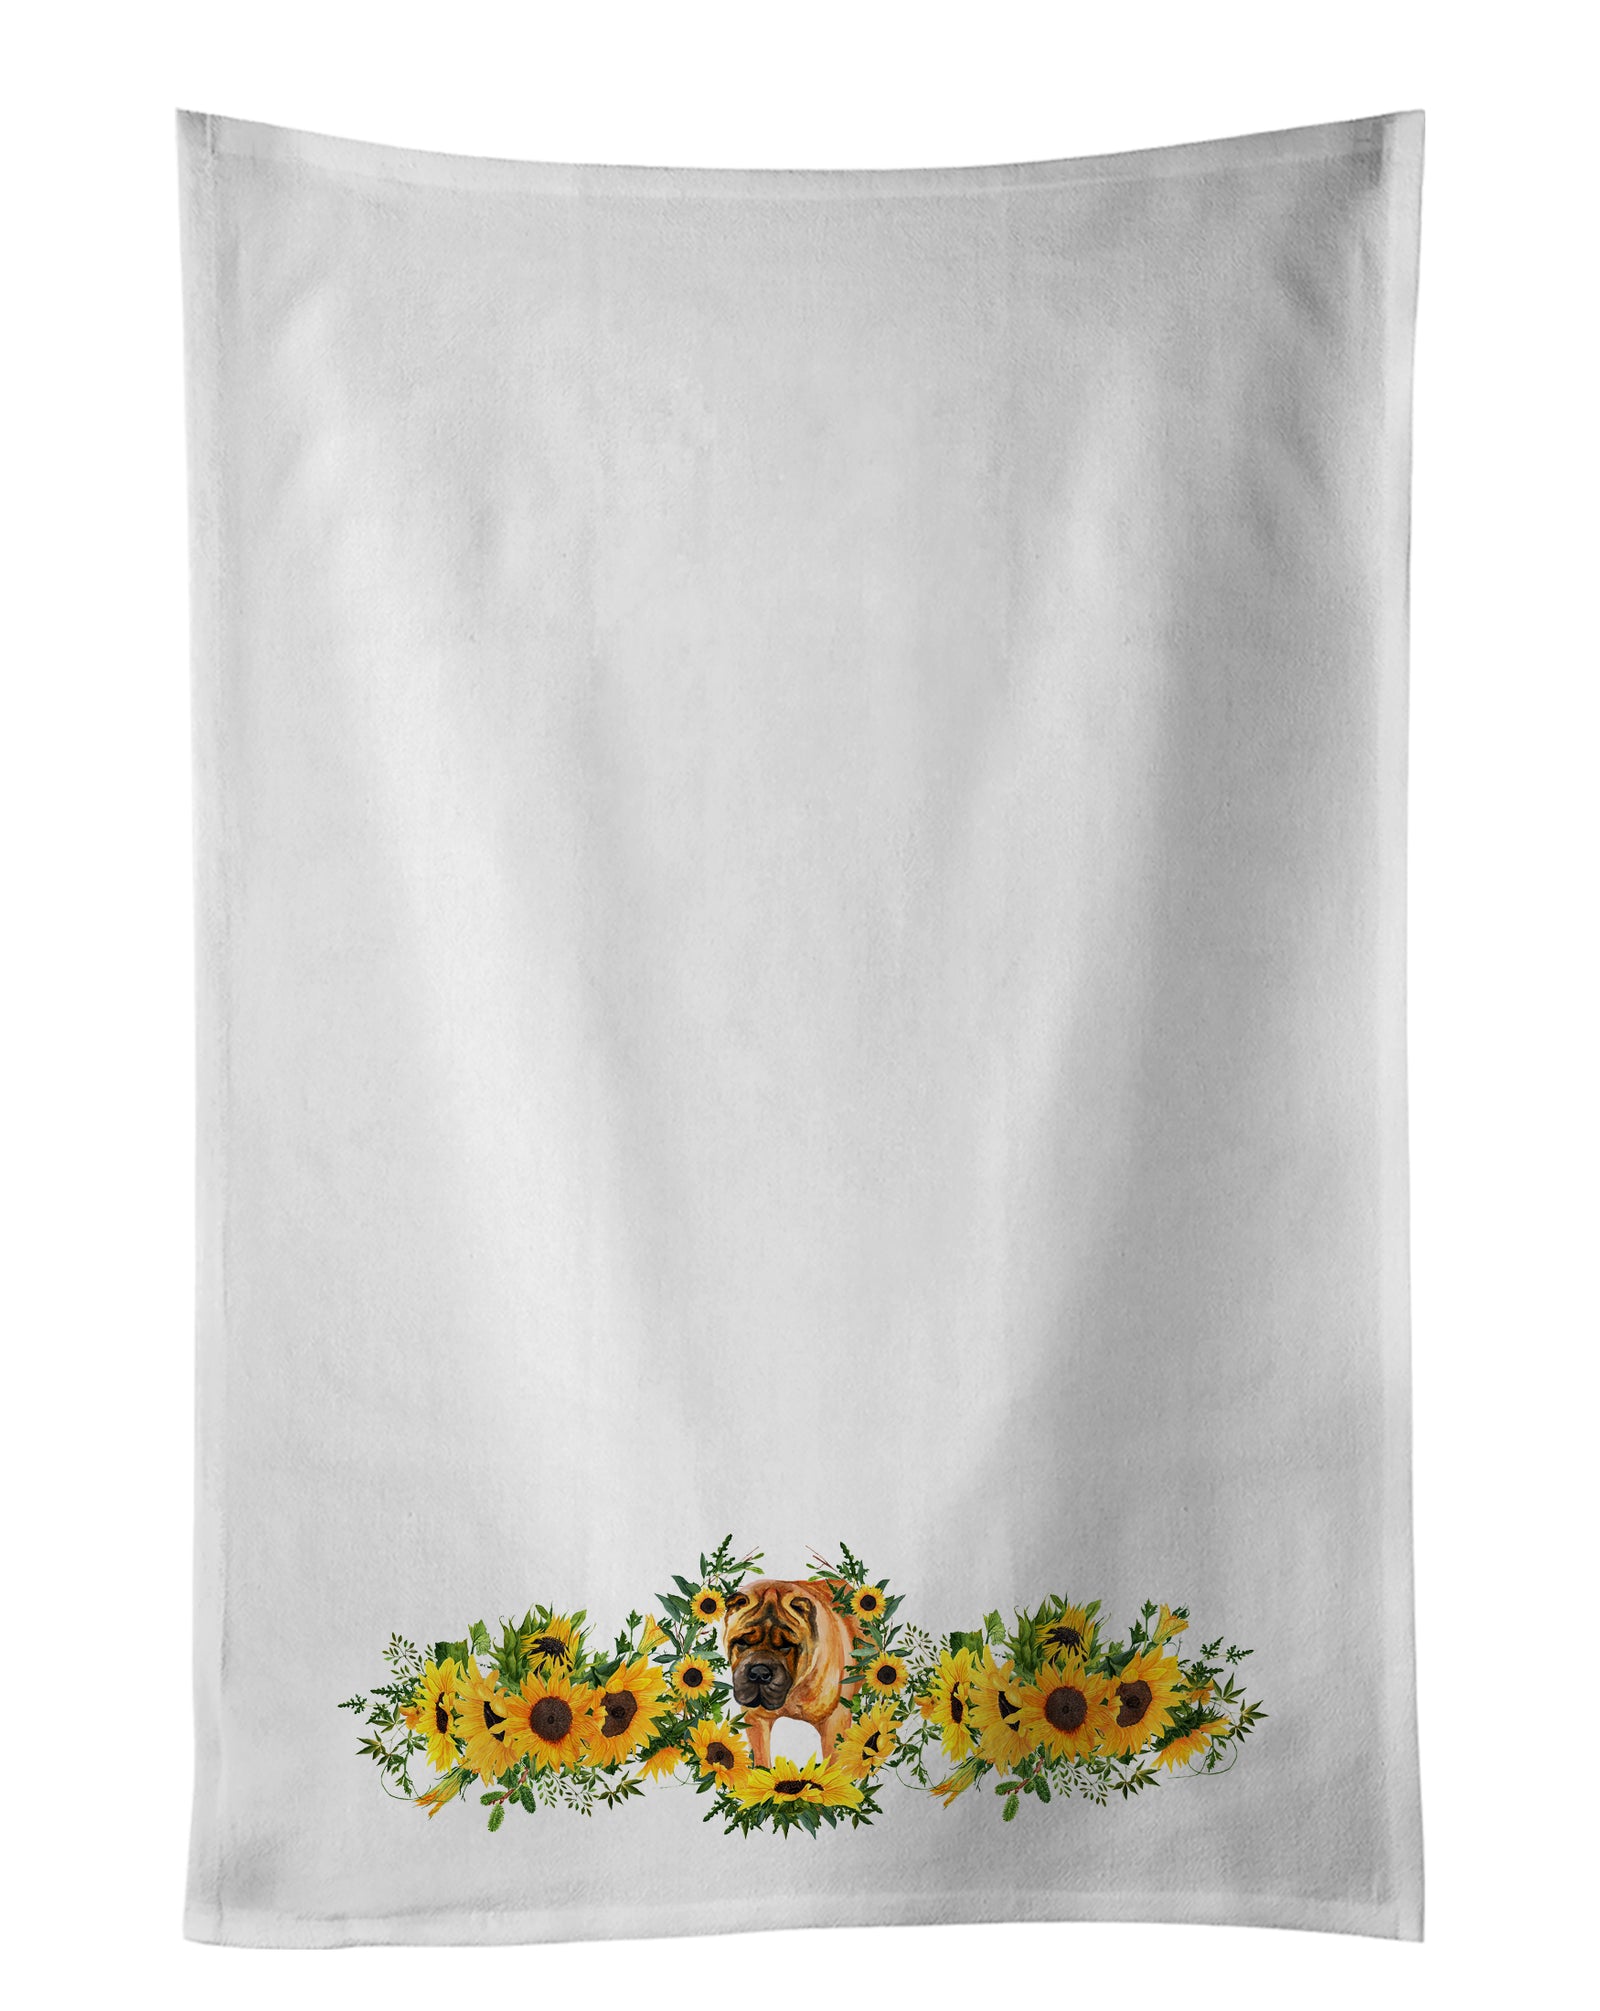 Buy this Shar Pei in Sunflowers White Kitchen Towel Set of 2